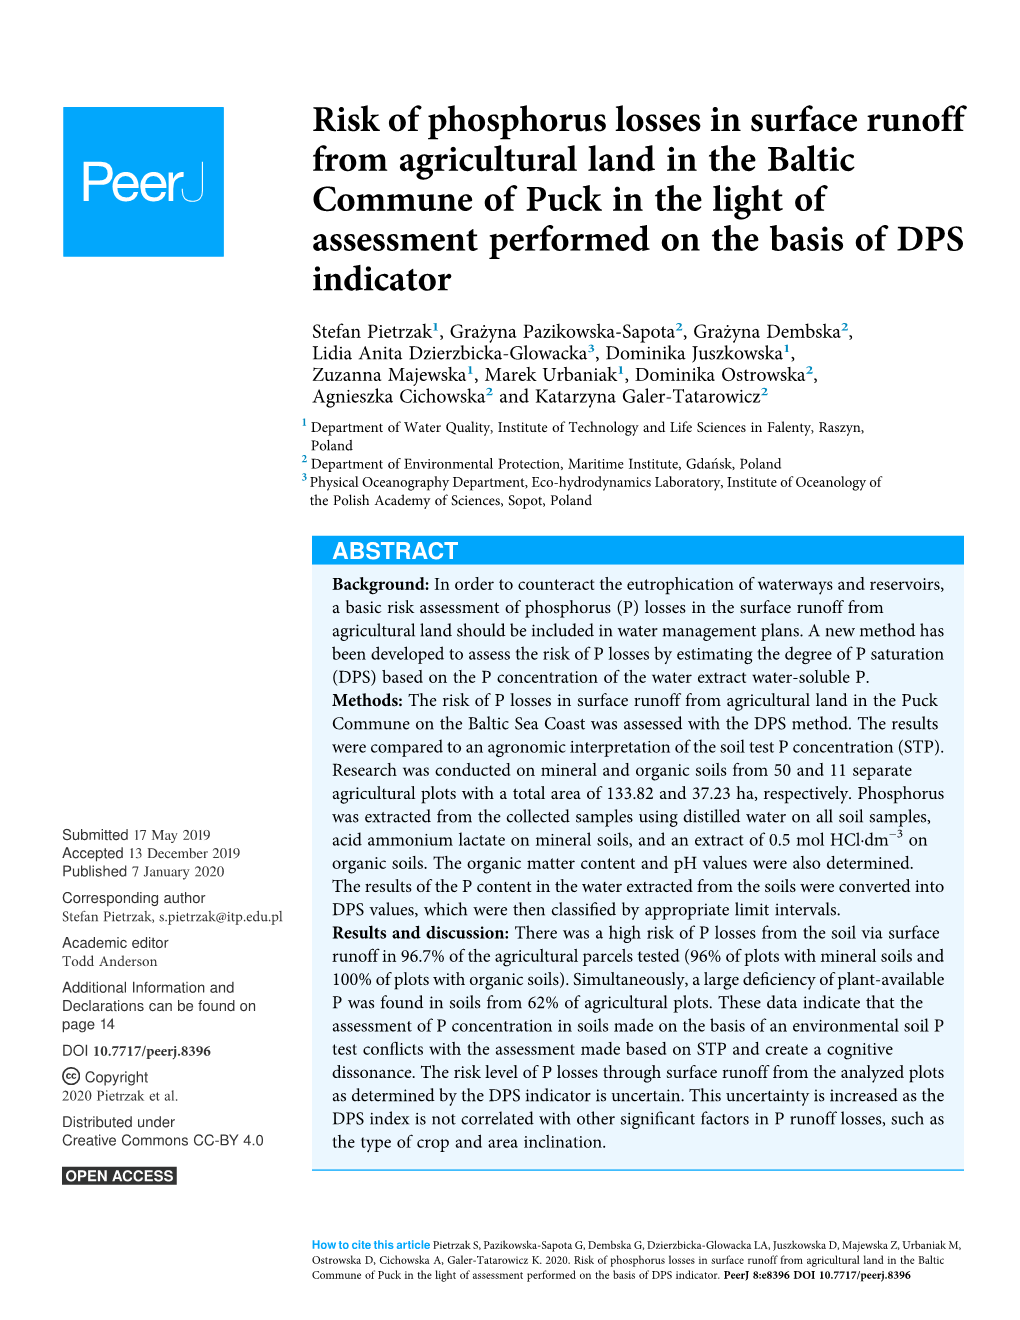 Risk of Phosphorus Losses in Surface Runoff from Agricultural Land in the Baltic Commune of Puck in the Light of Assessment Performed on the Basis of DPS Indicator